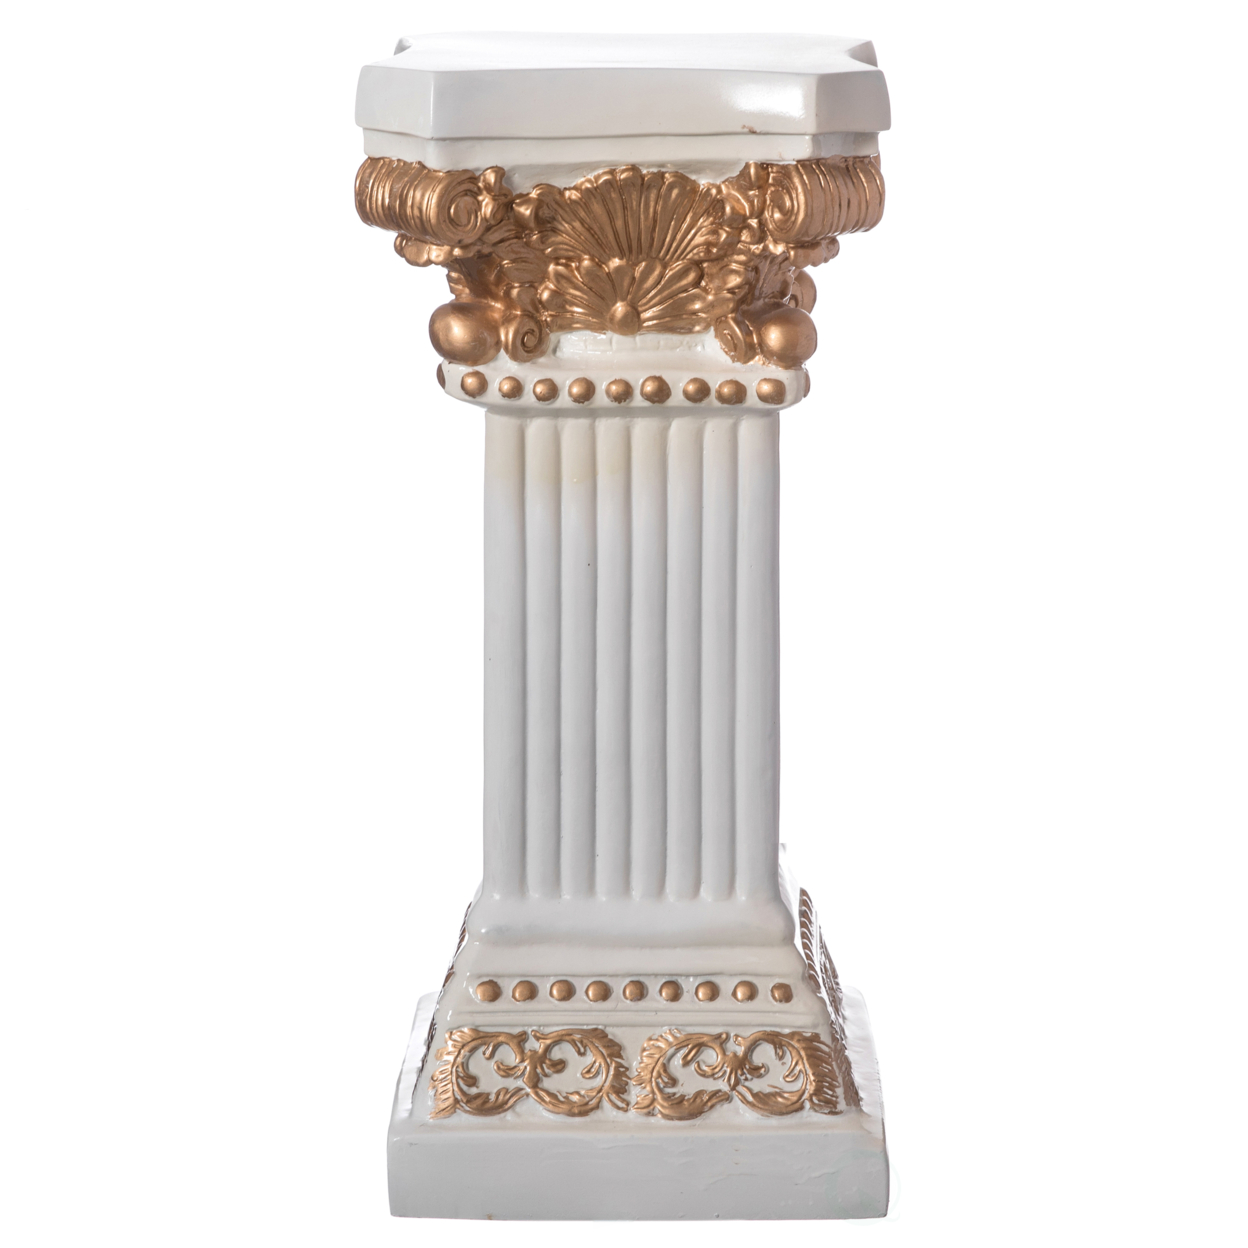 Decorative Modern Fiberglass White And Gold Plinth Roman Style Column Ionic Pedestal Vase Stand For Wedding, Living Room, Or Dining Room - 2